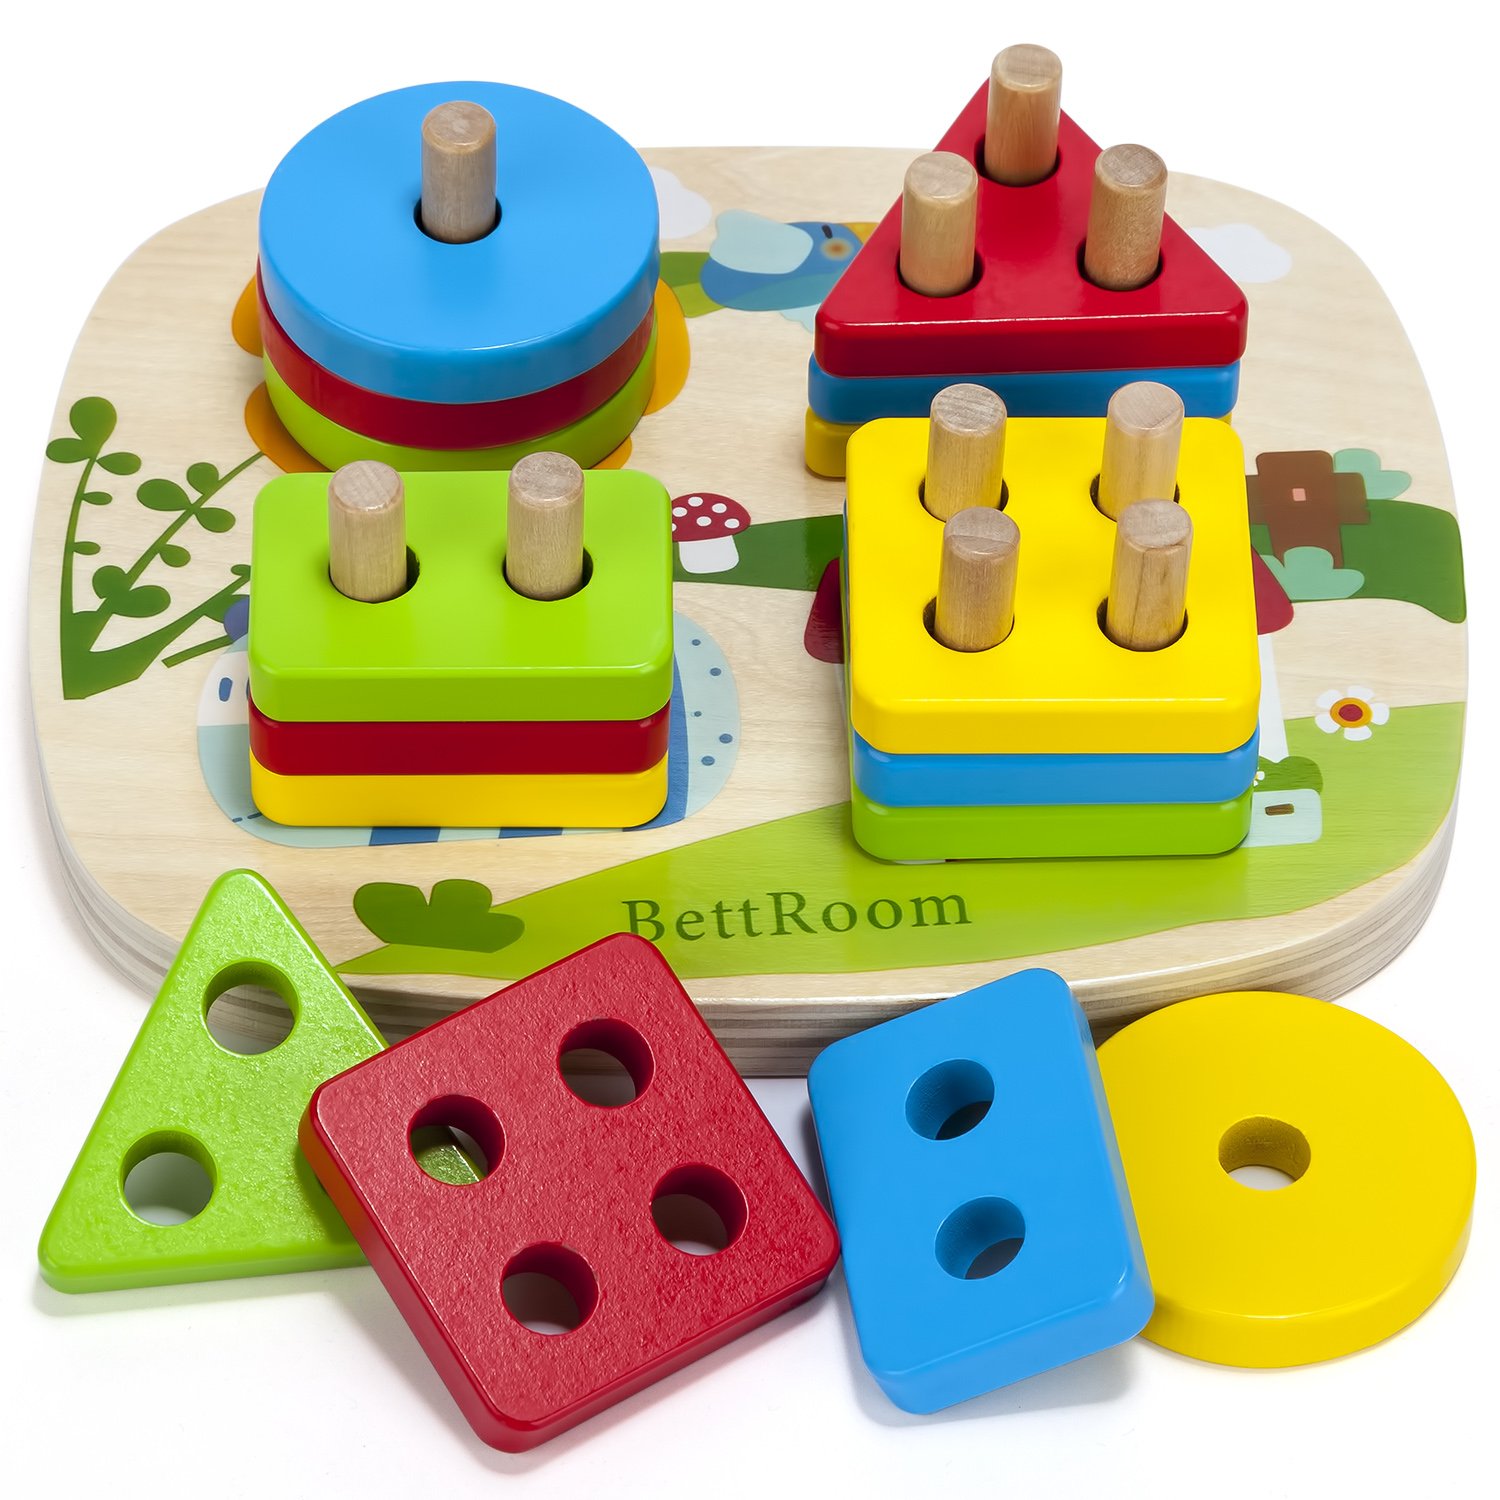 BettRoom Toddler Toys for 1 2 3 4-5 Year Old Boys Girls Wooden Educational Preschool Shape Color Recognition Geometric Board Blocks Stacking Sort Kids Children Baby Non-Toxic